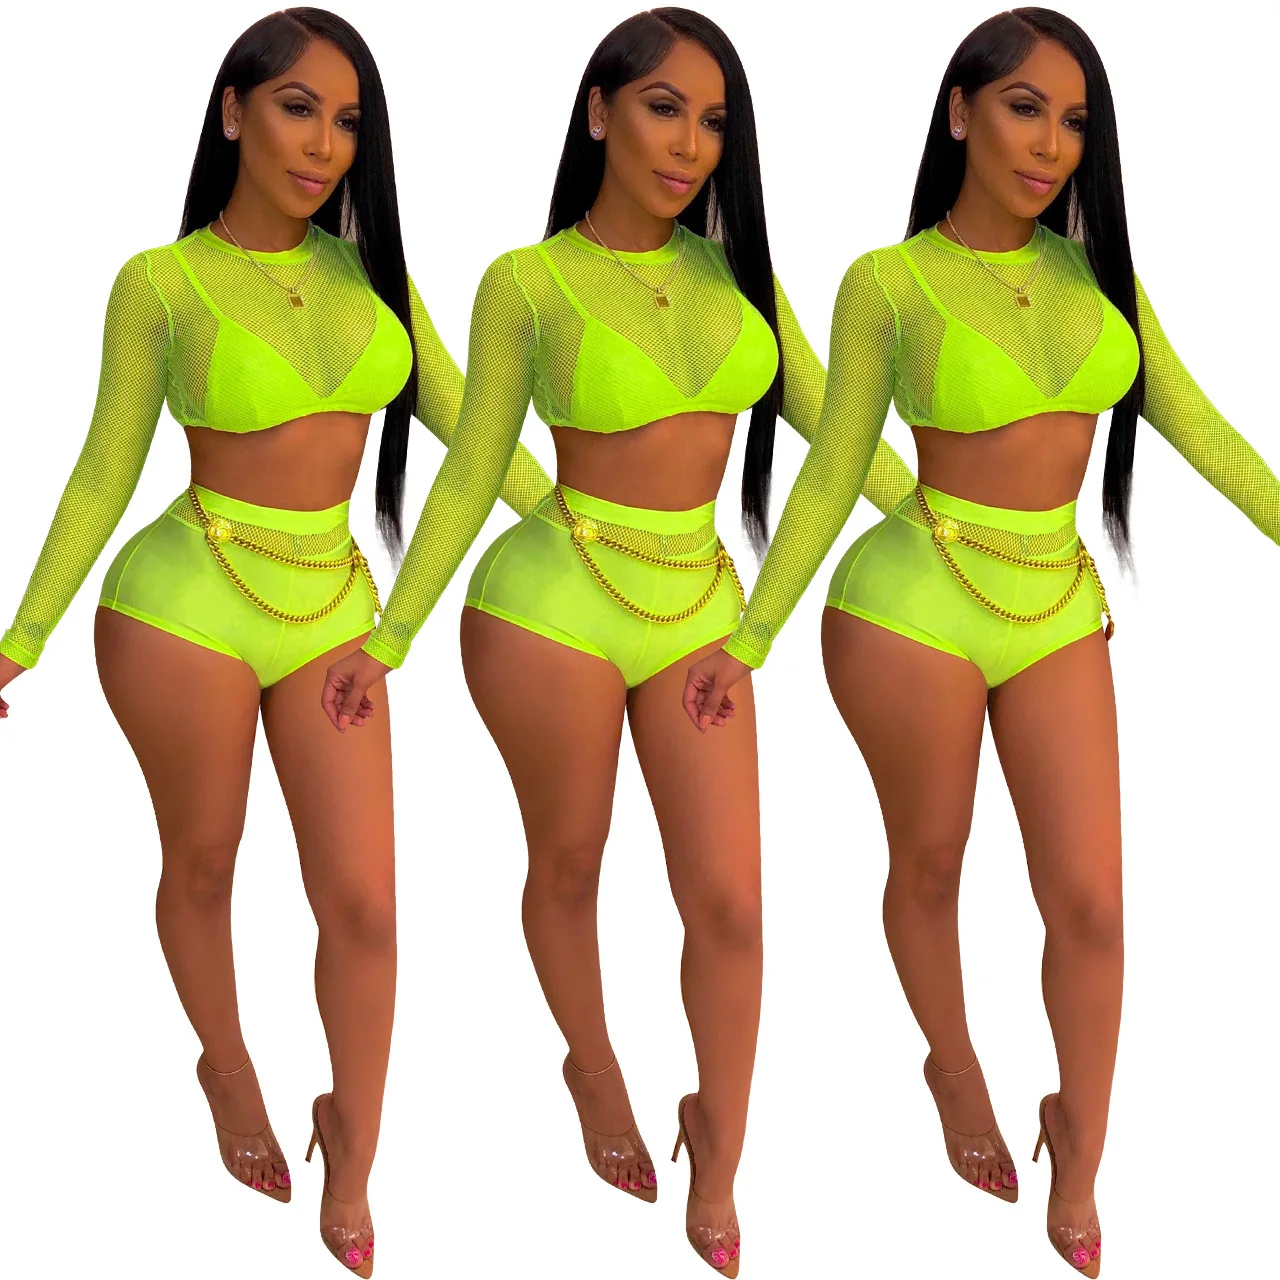 

See Through Backless Long Sleeve Tops and Hot Shorts Matching Set Club Night Wear Mesh Hollow Out Fashion Neon Two Piece Set